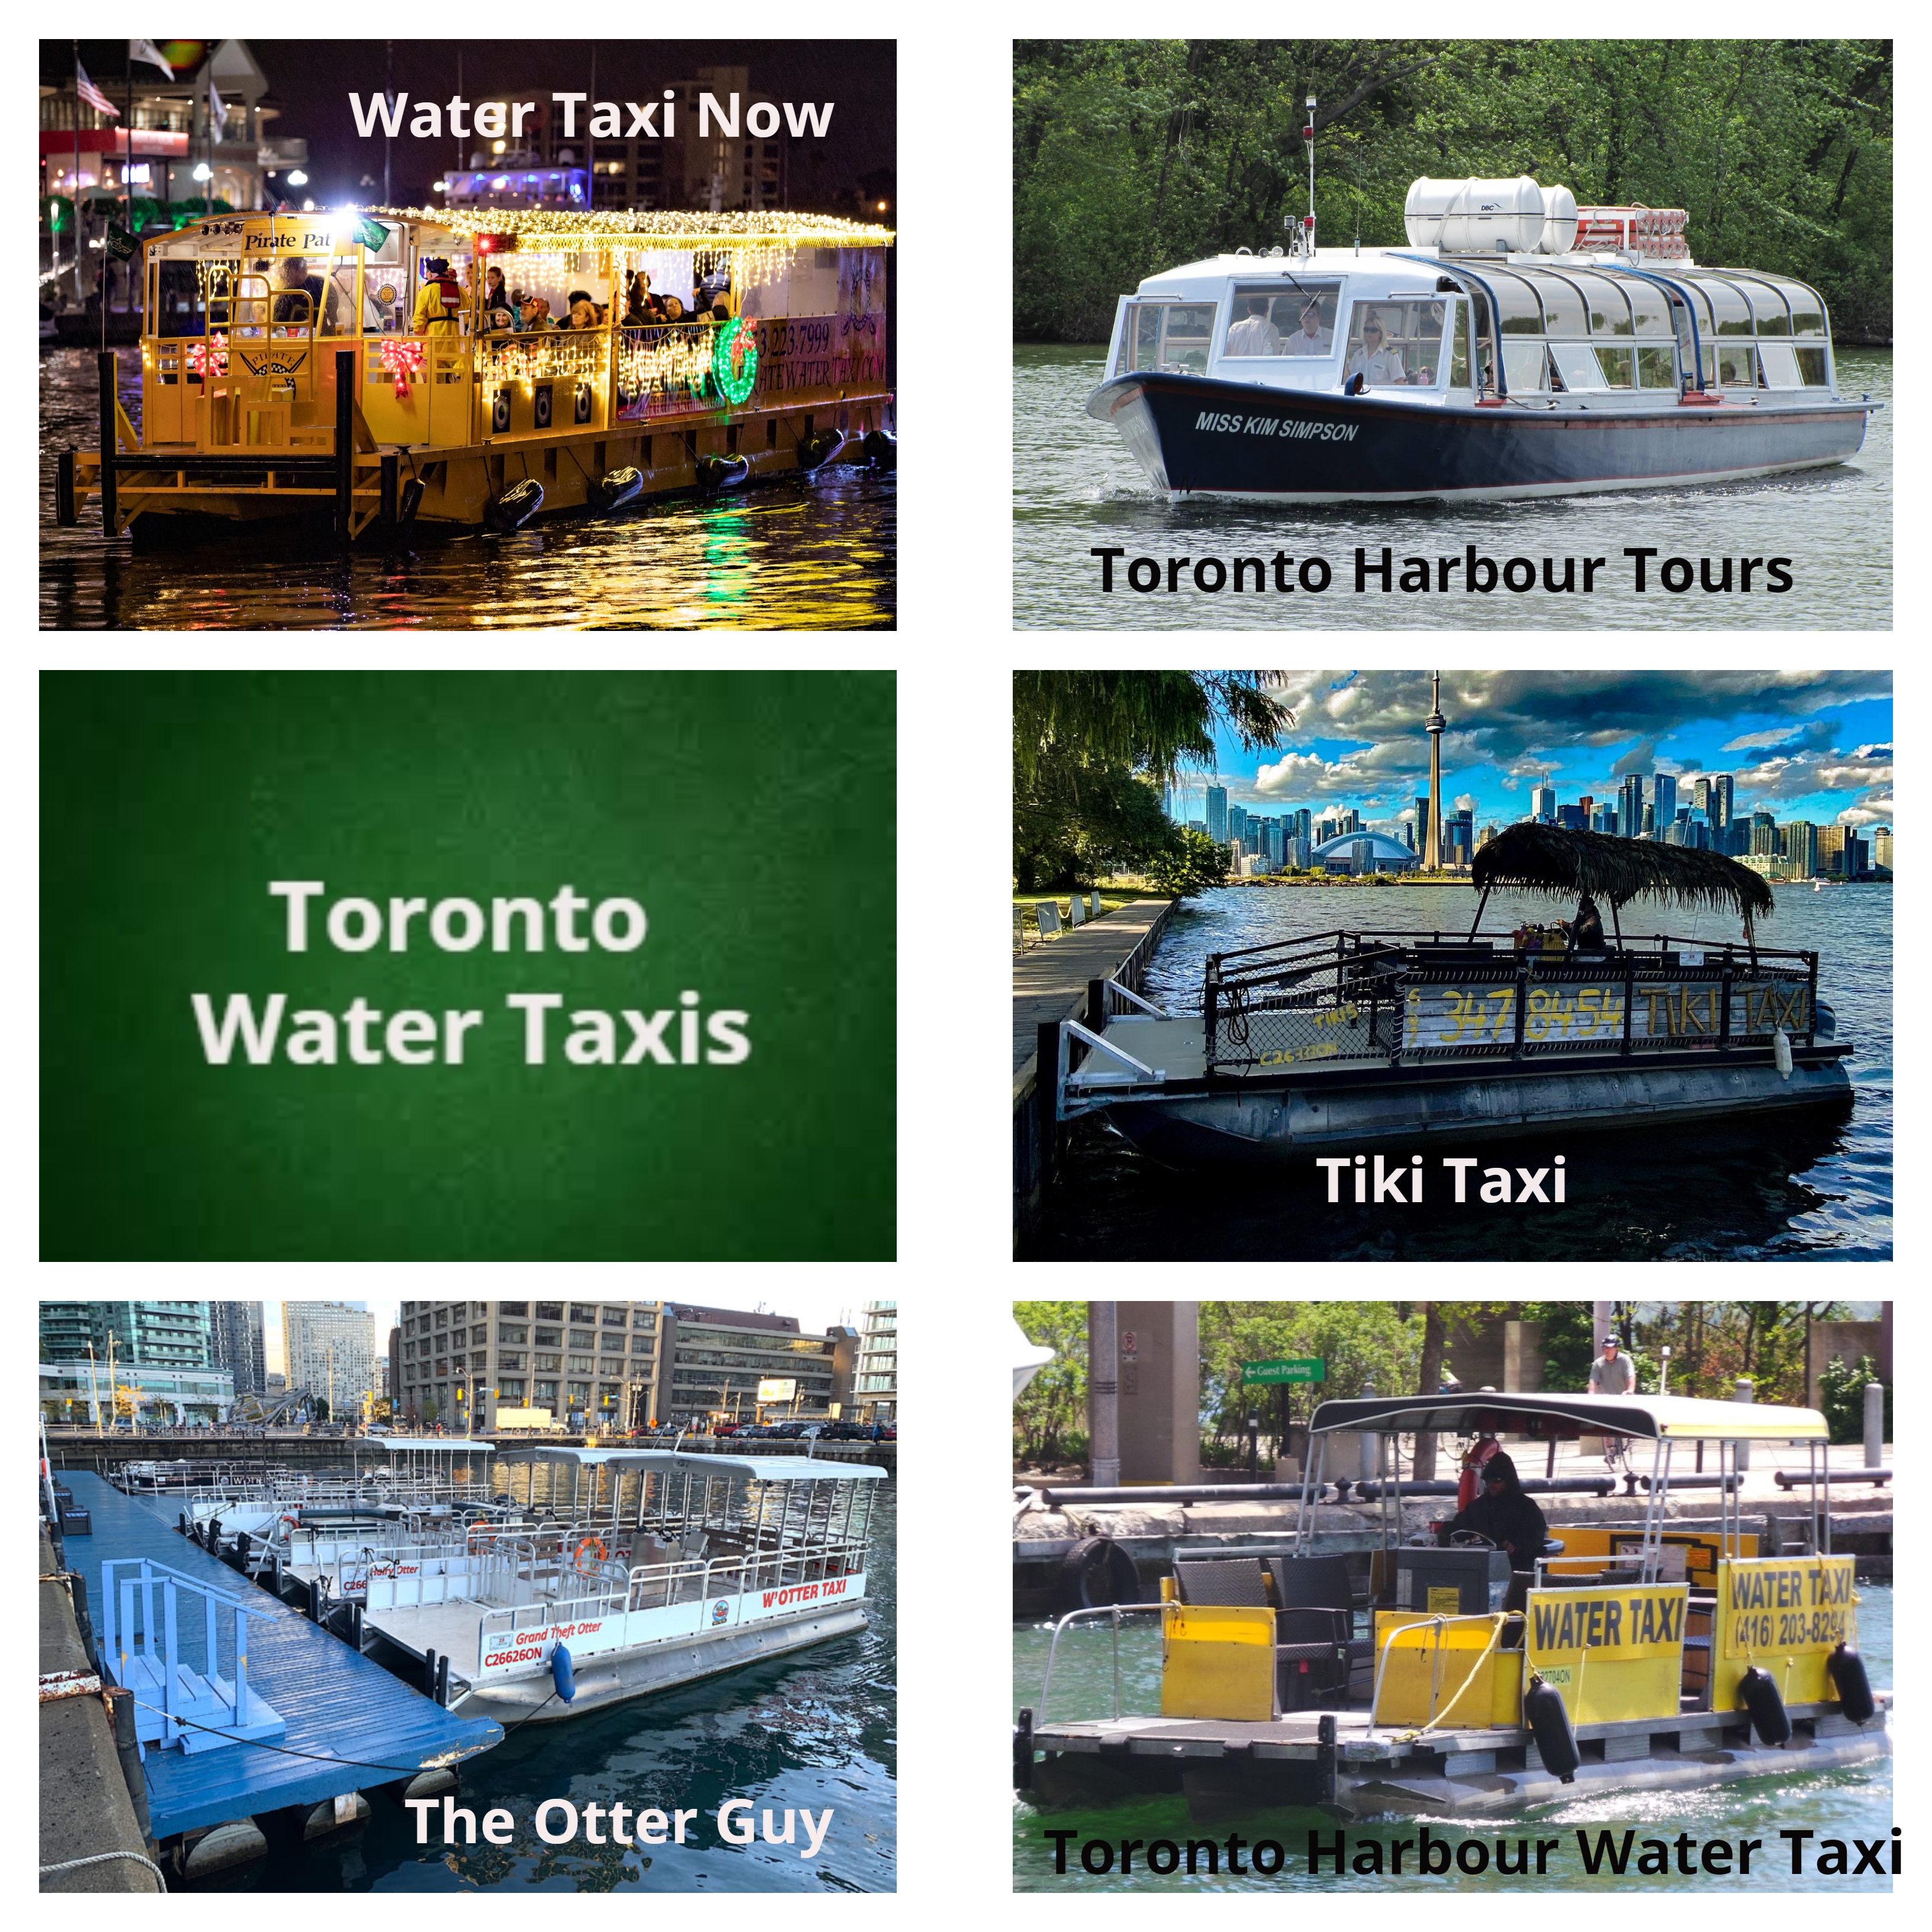 water taxi collage-1